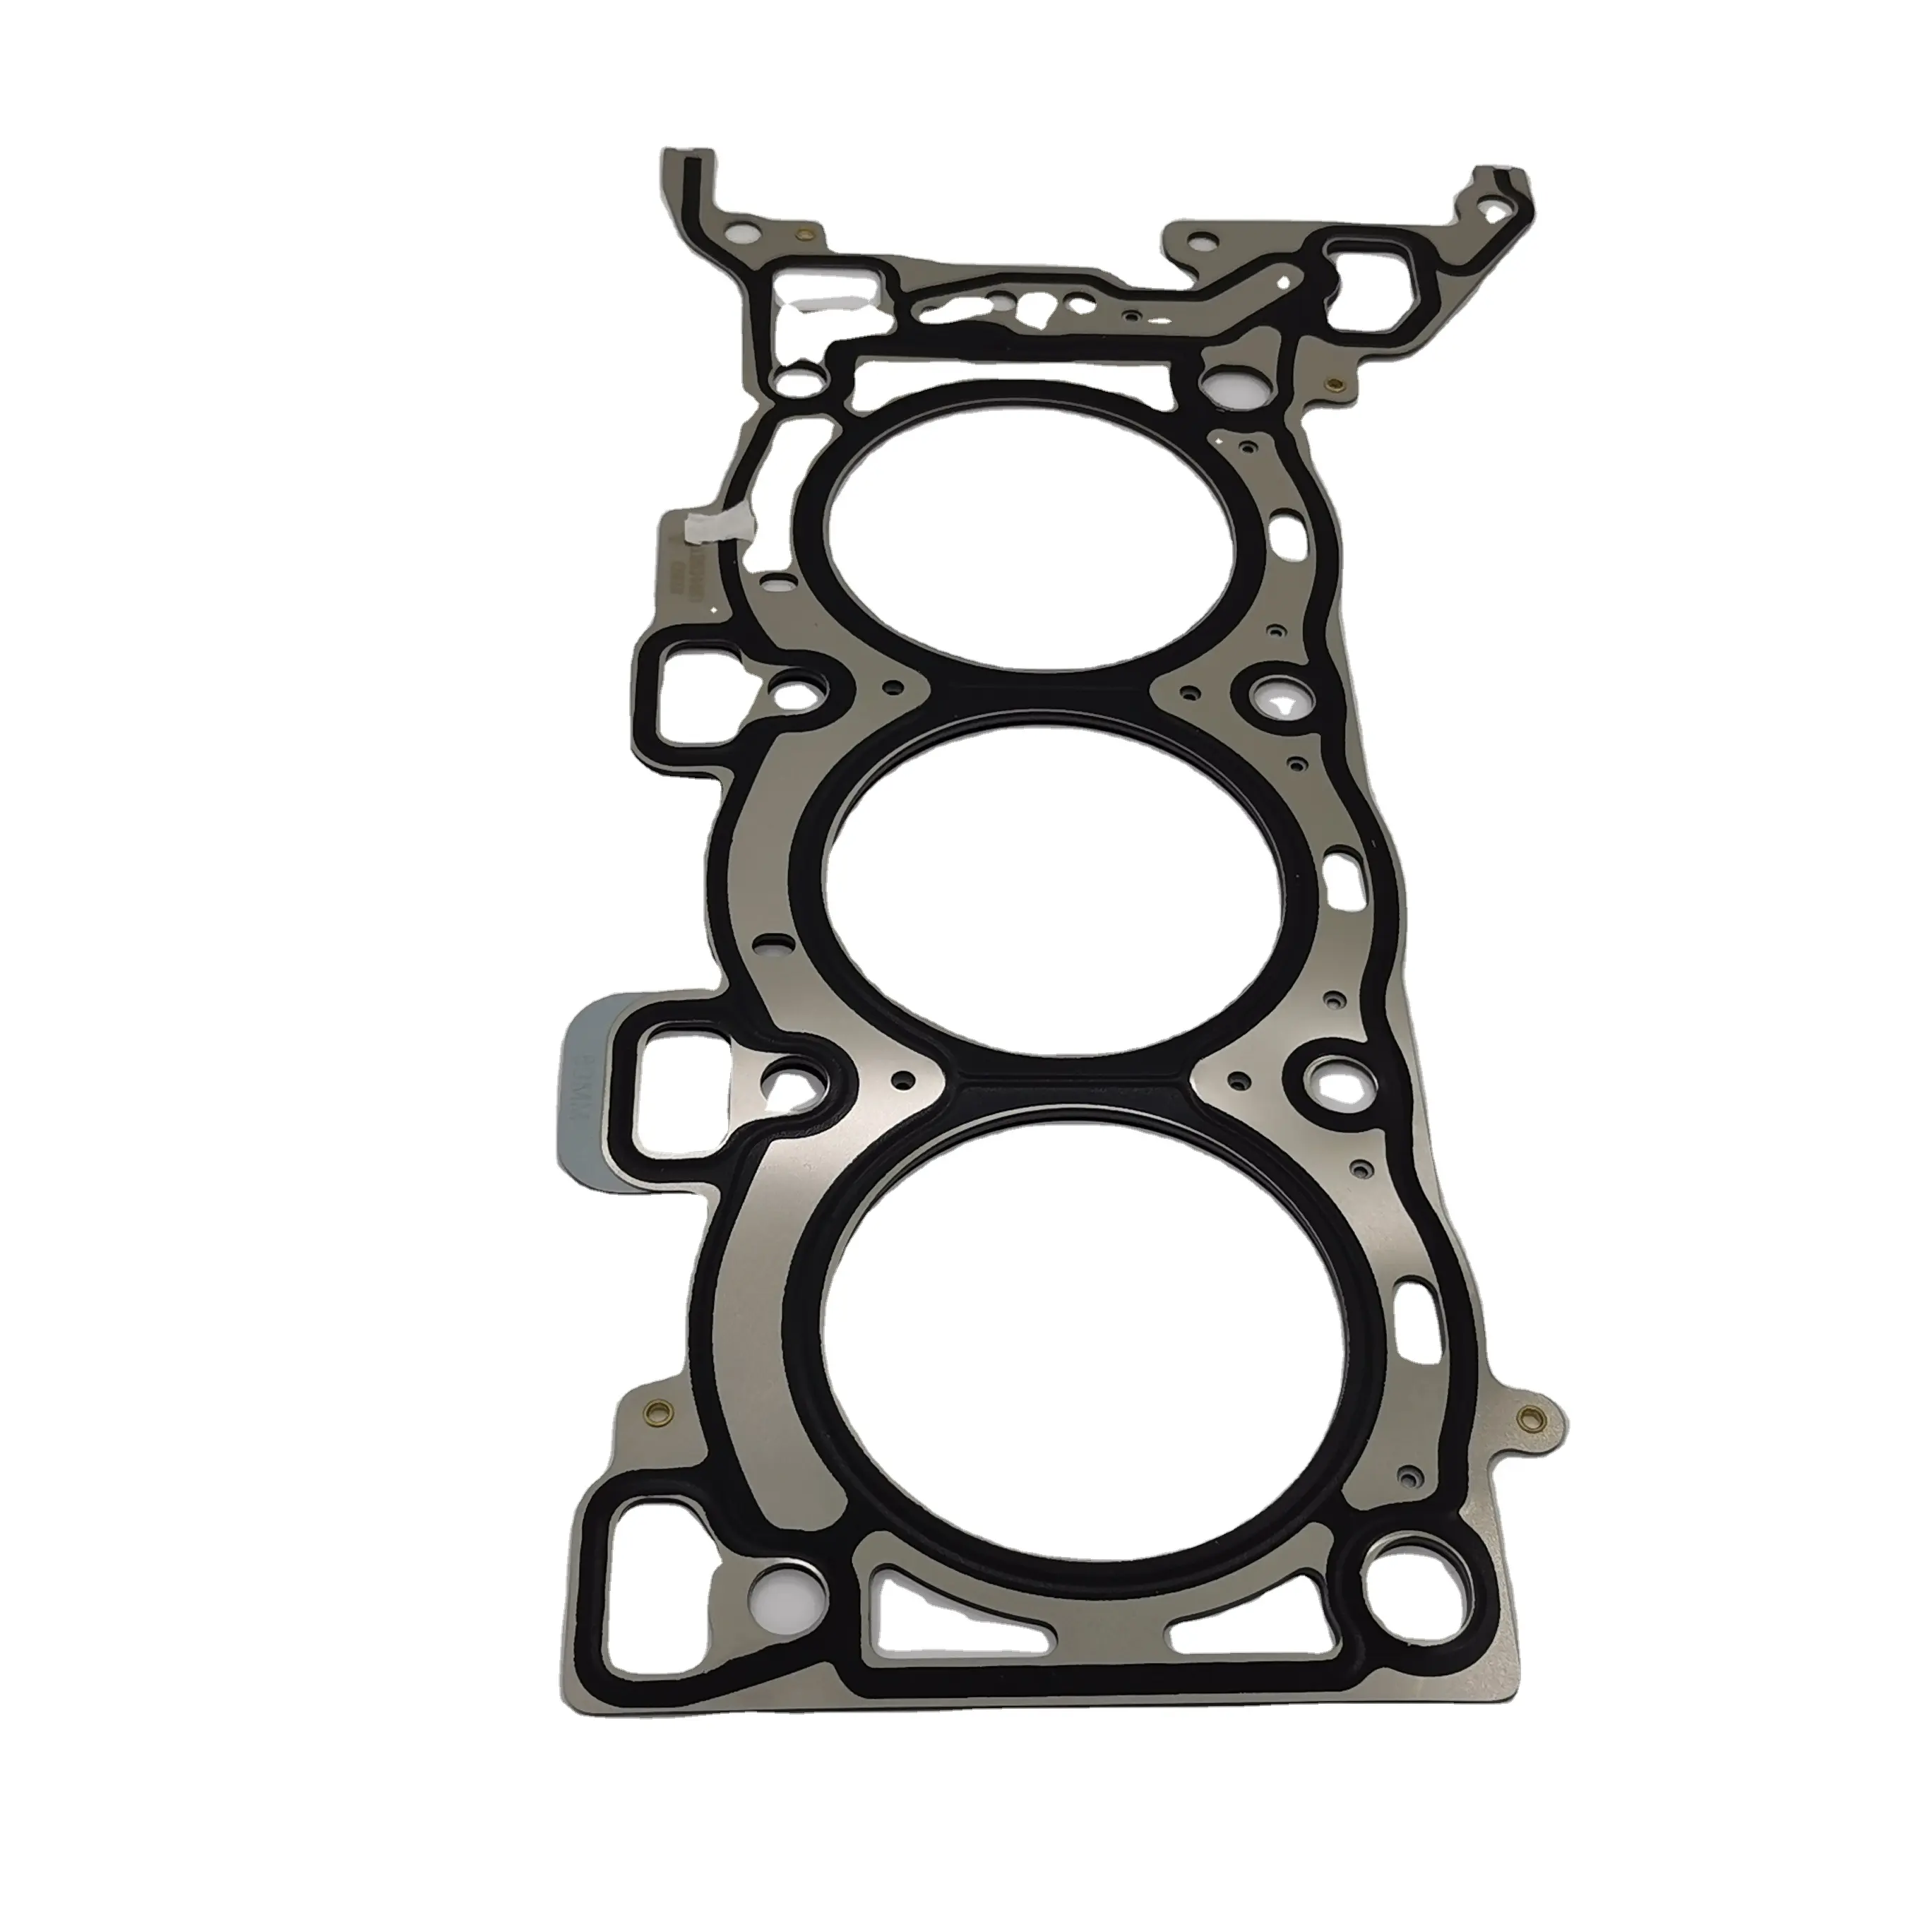 Auto Parts Cylinder Head Gasket 12634481 12634480 12631764 12605844 12566834 For Chevrolet Captiva 3.2 Cadillac CTS S